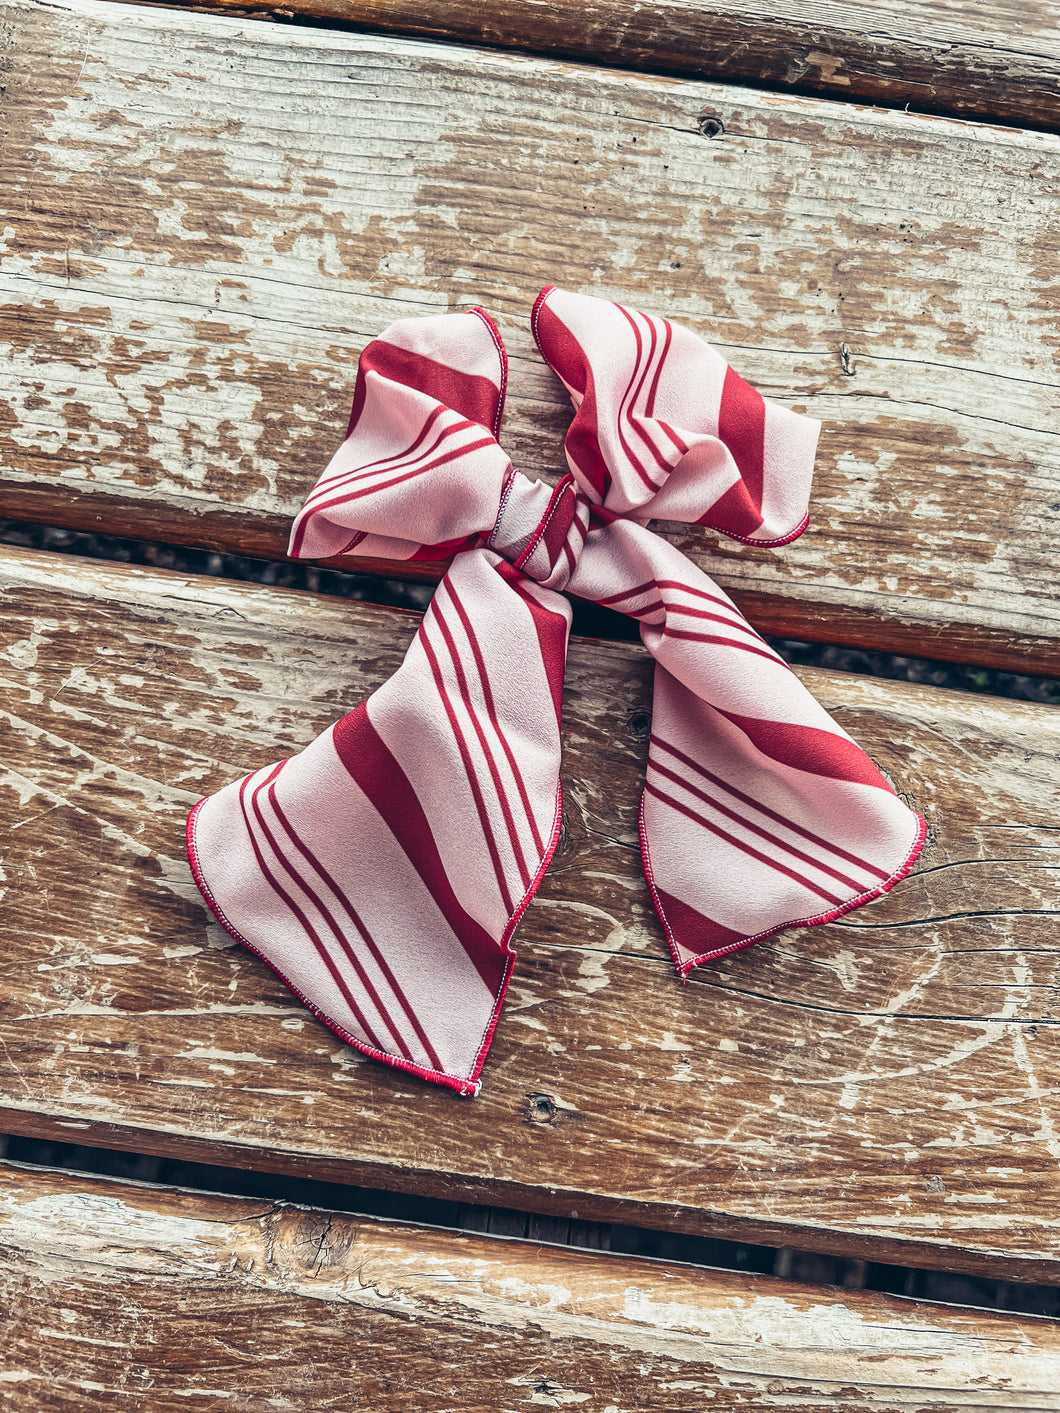 Candy Cane Charley Bow